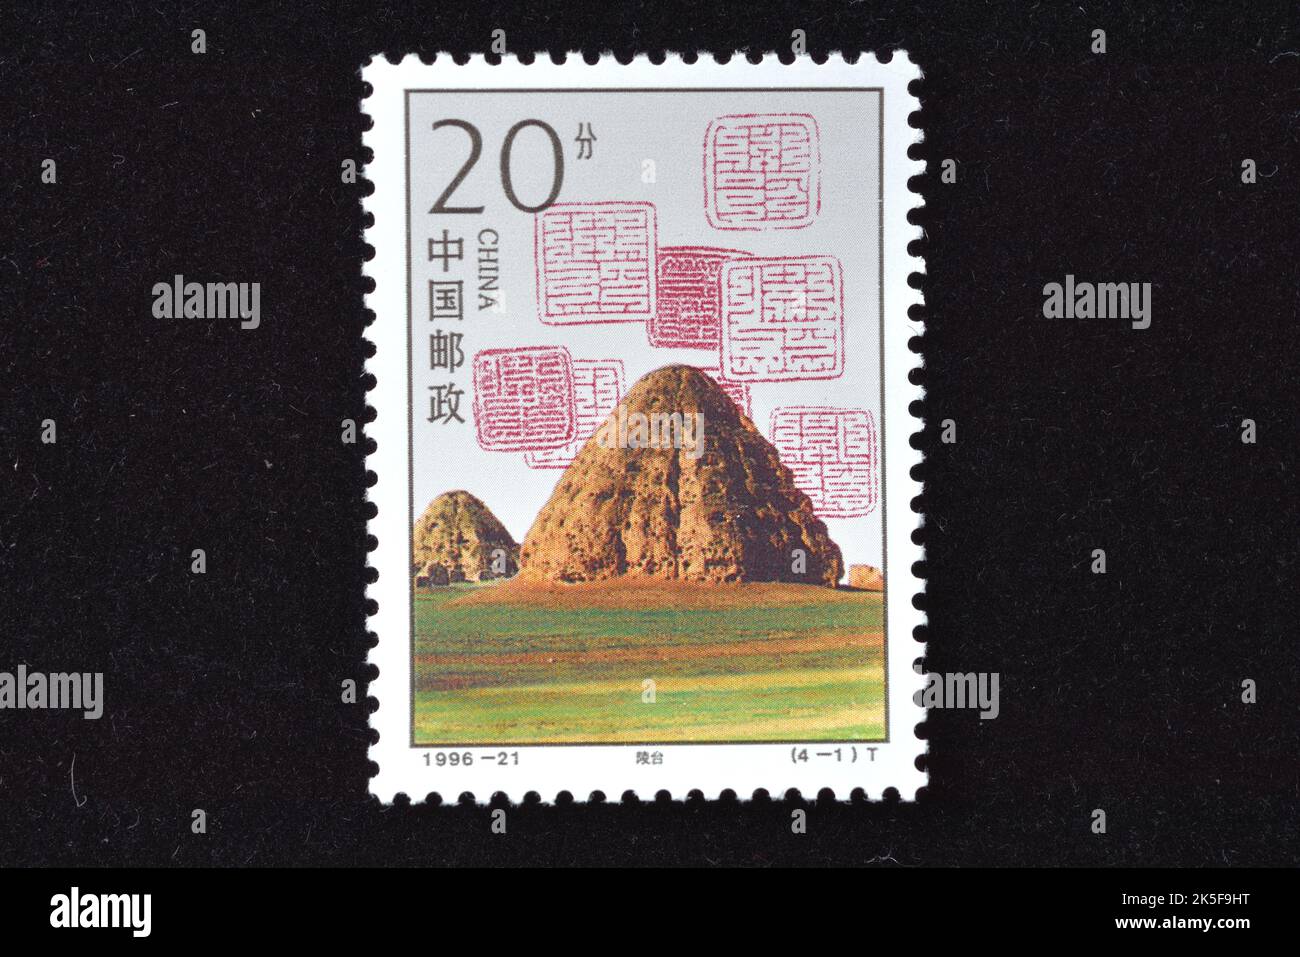 CHINA - CIRCA 1996: A stamp printed in China shows 1996-21, Scott 2709-12 Mausoleums of Western Xia , circa 1996 Stock Photo